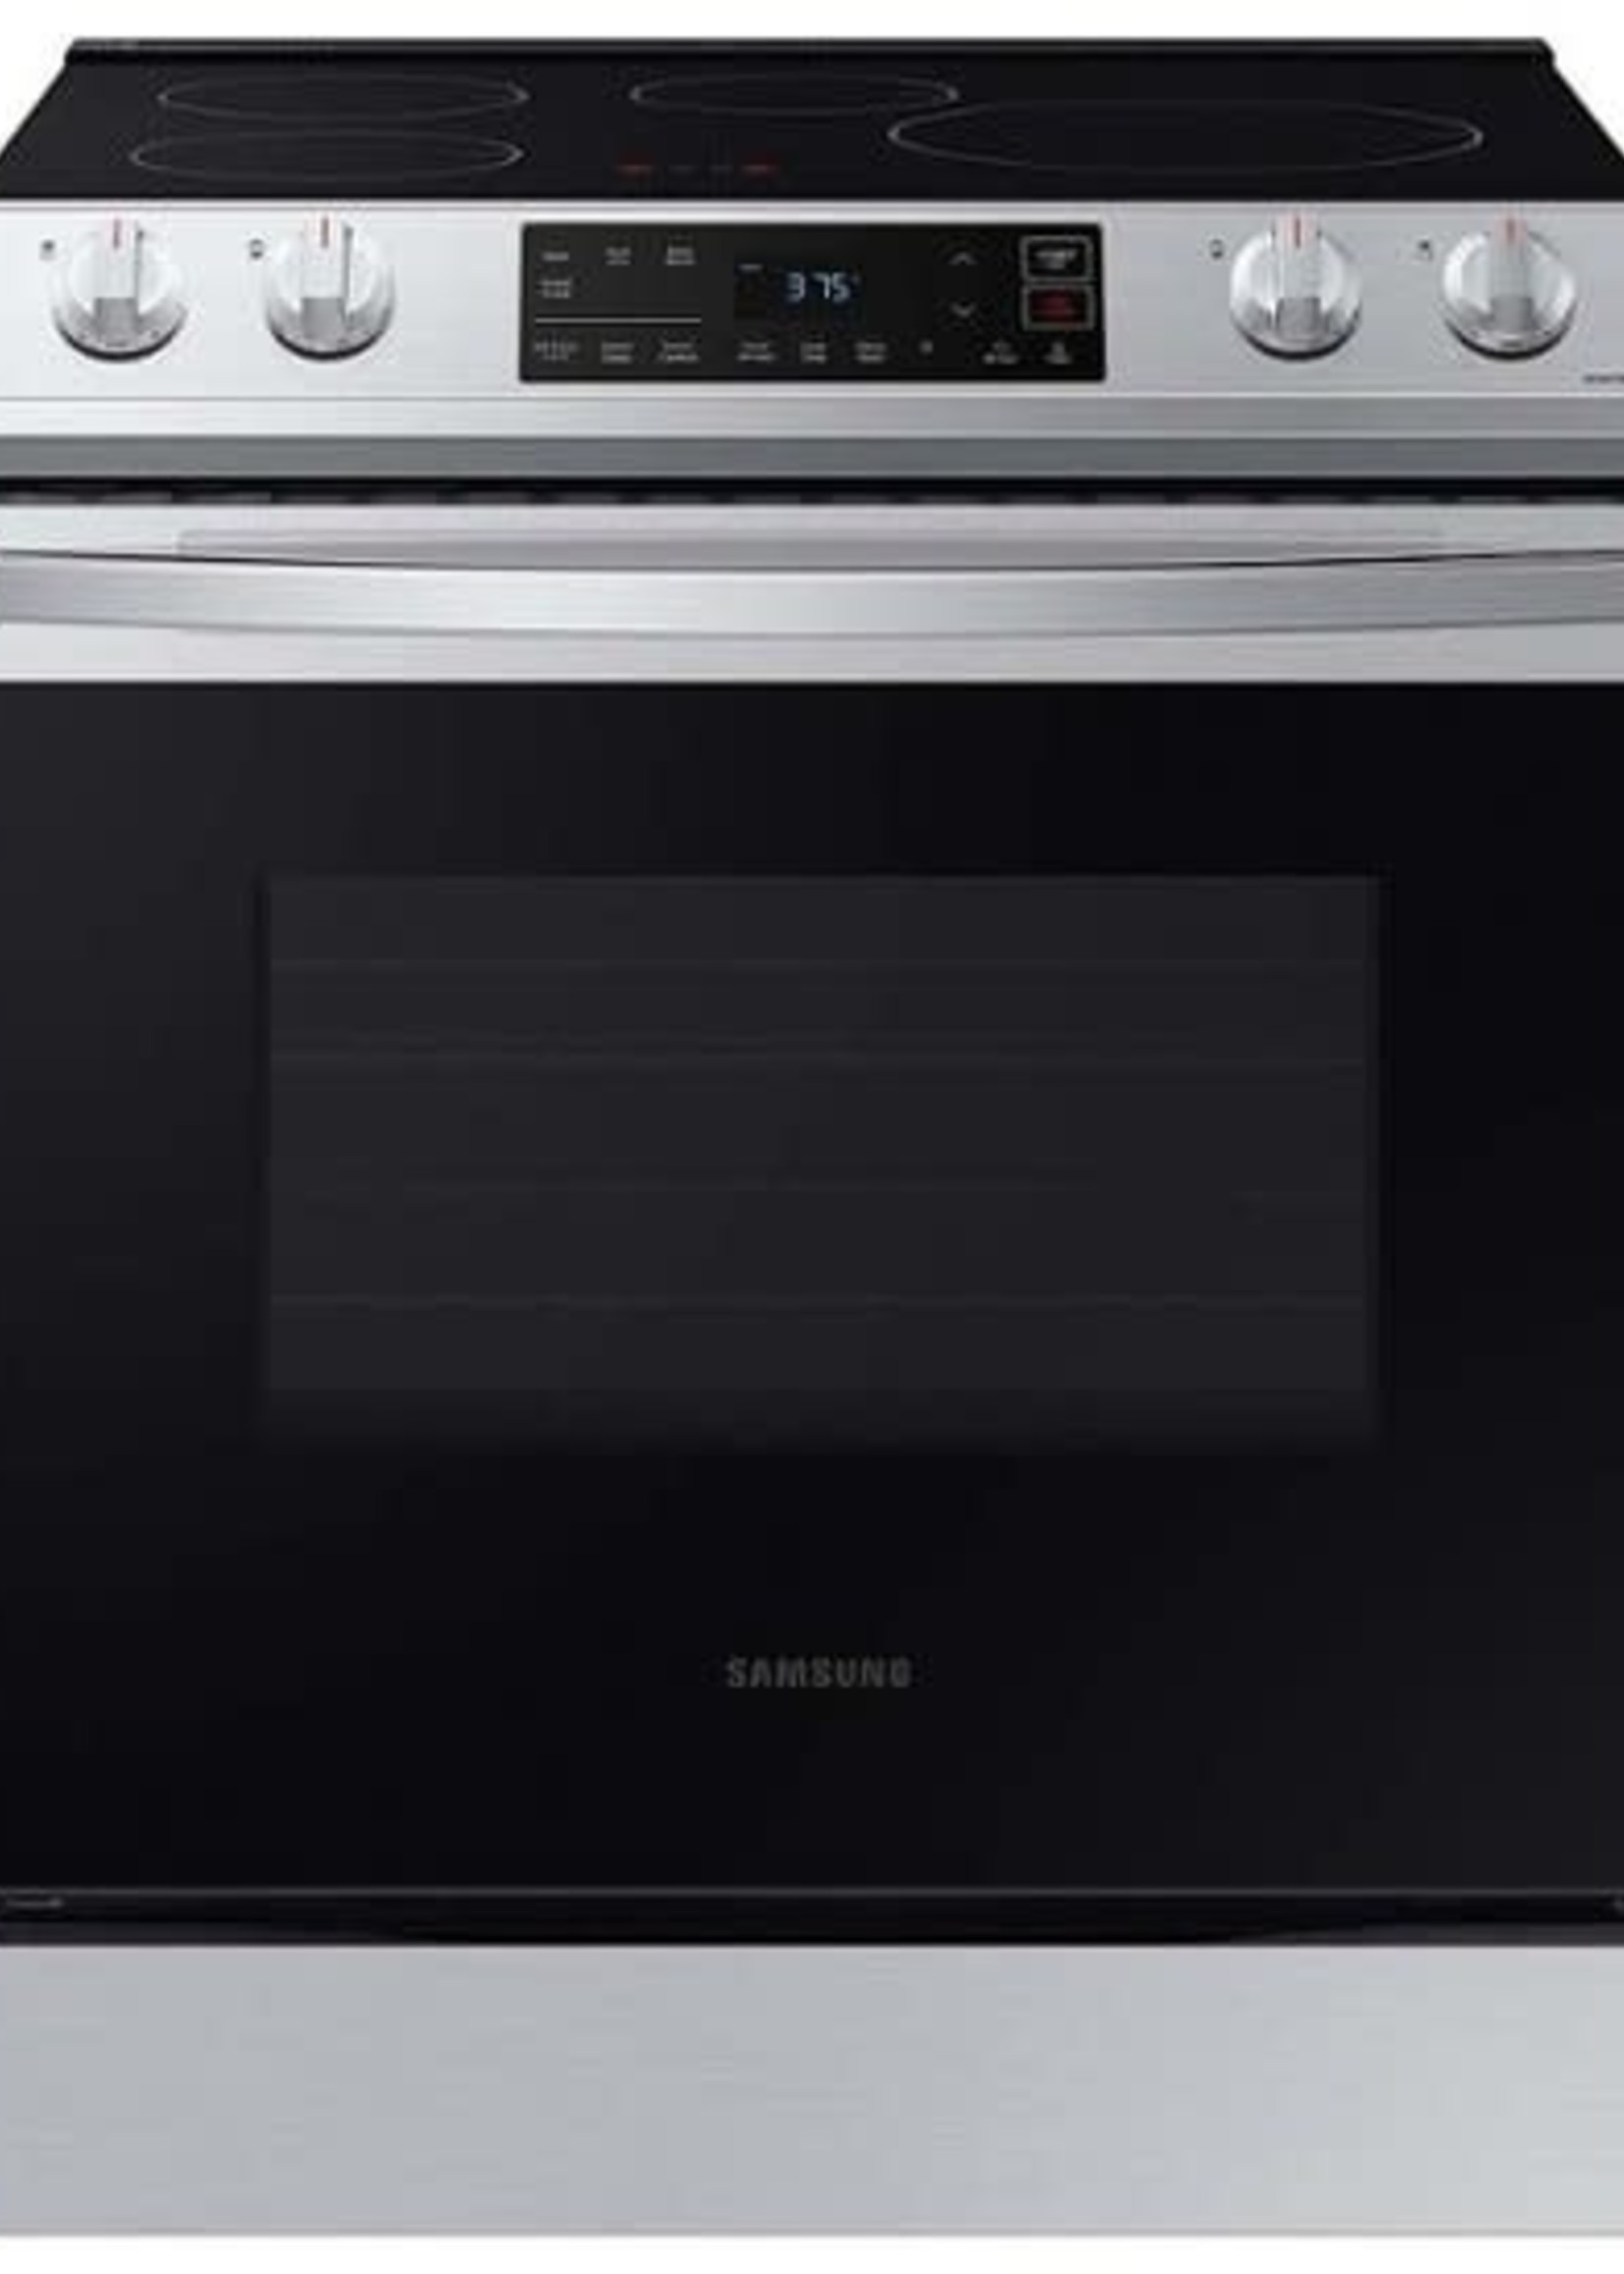 Samsung *Samsung  NE63B8211SS  30 in. 6.3 cu. ft. Slide-In Induction Range with Self-Cleaning Oven in Stainless Steel